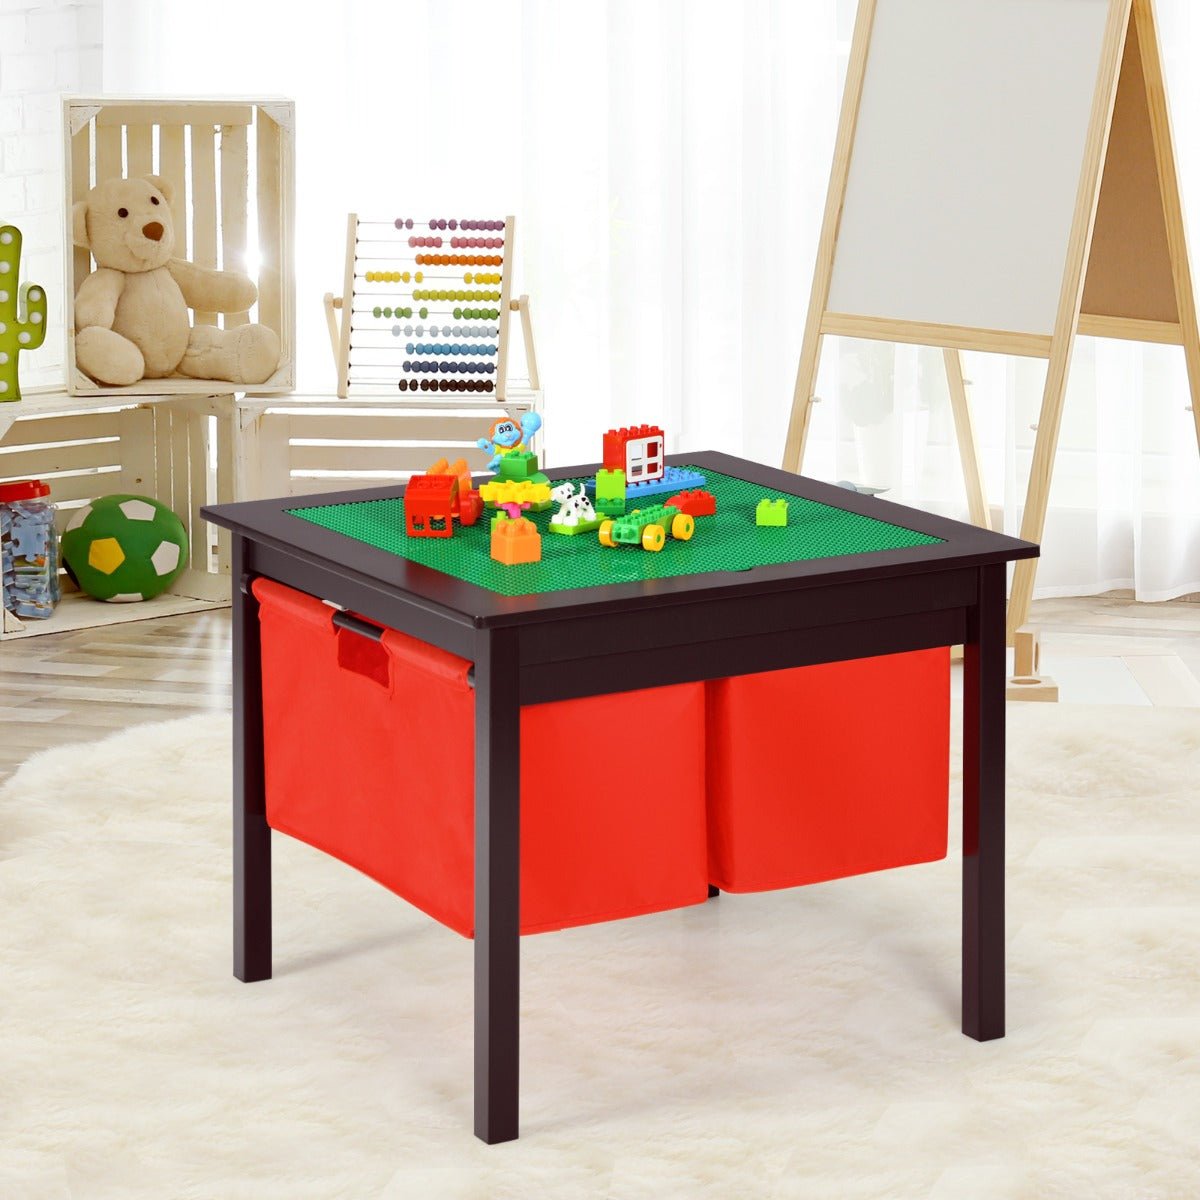 Buy the Ultimate Espresso Kids Activity Table for Creative Playtime